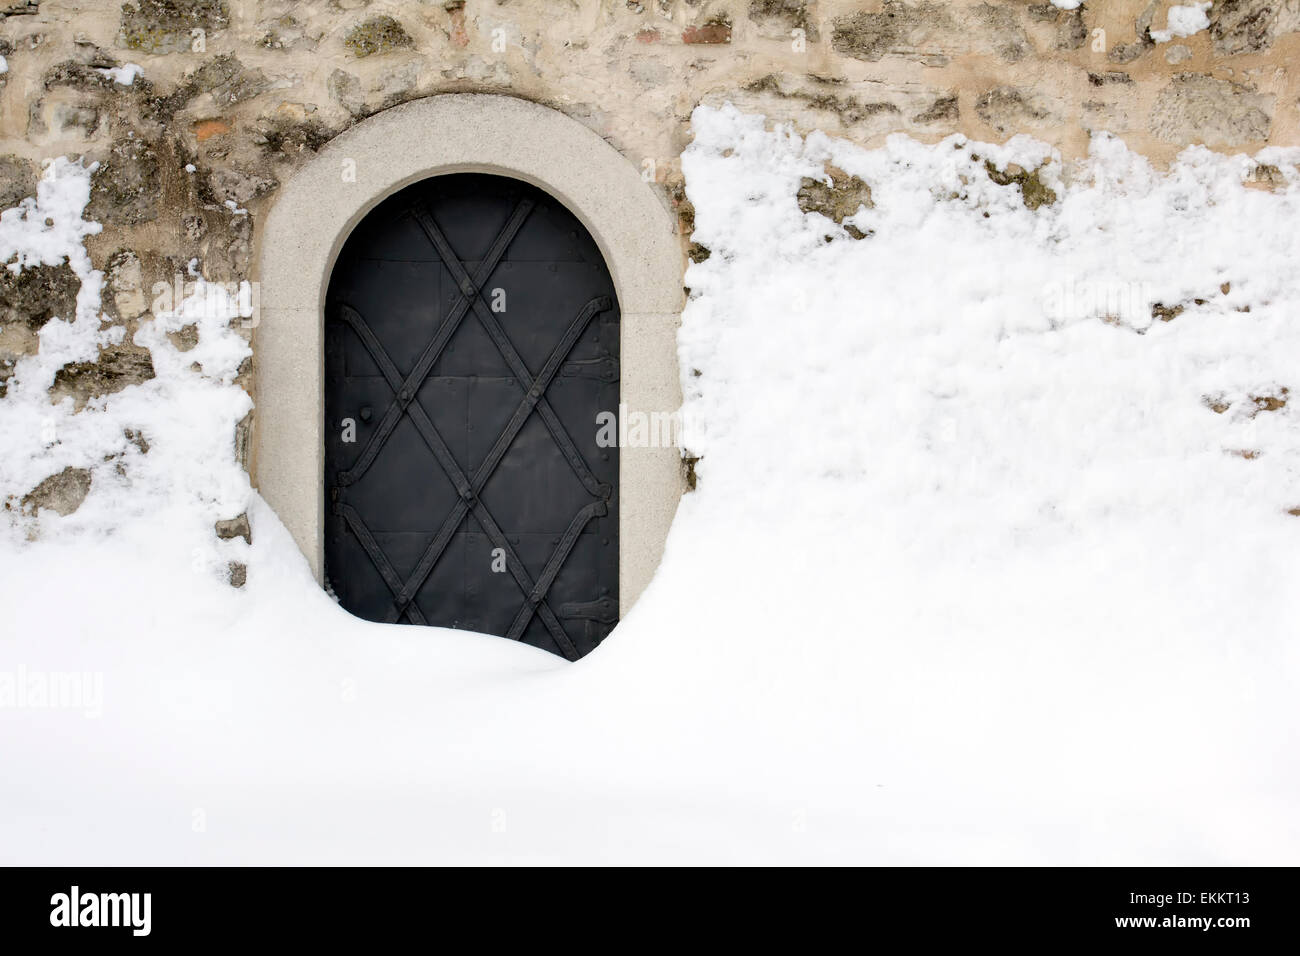 Small black iron castle door, backdoor, covered with snow. Stock Photo